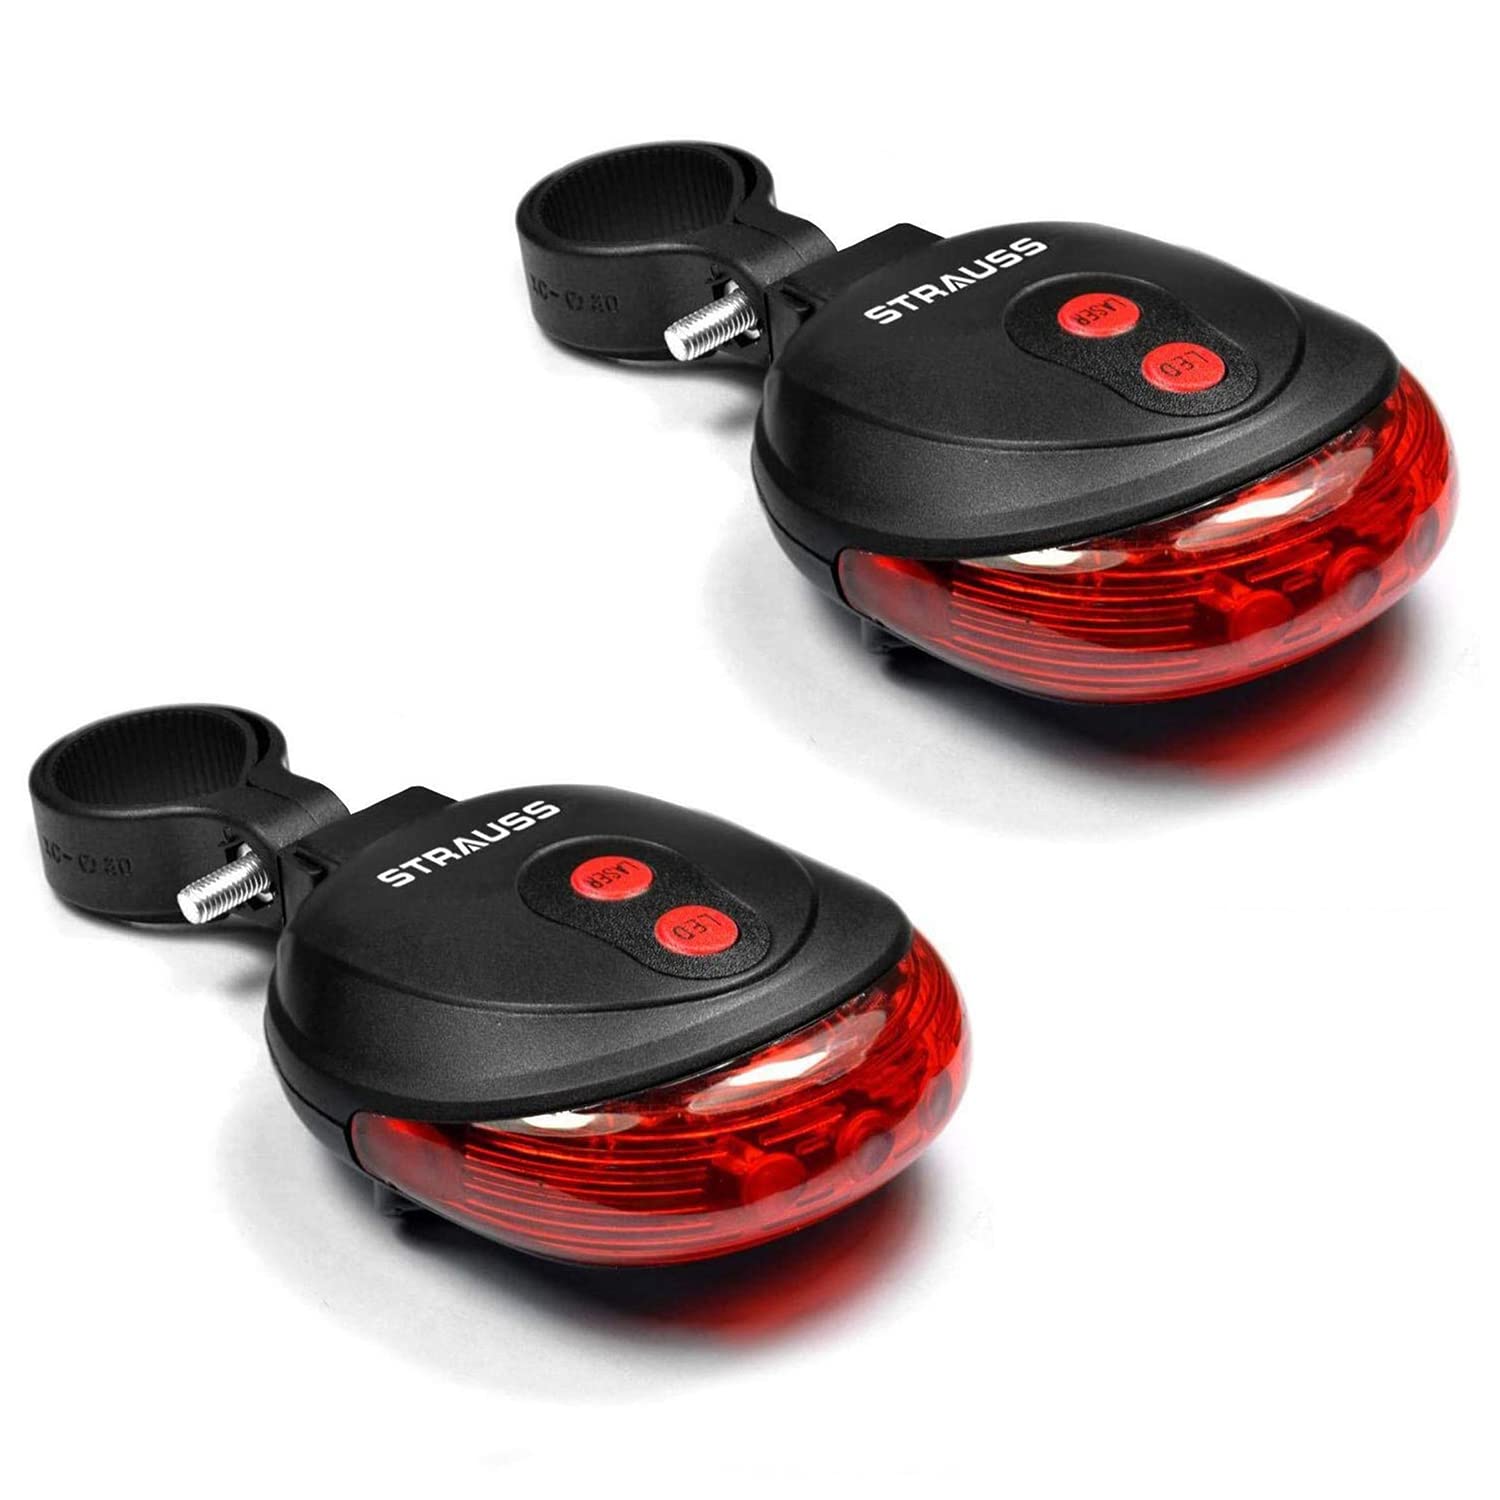 Flash Tail Bicycle Light with Laser | Cycle Light | Cycle Back Light (Pack of 2)